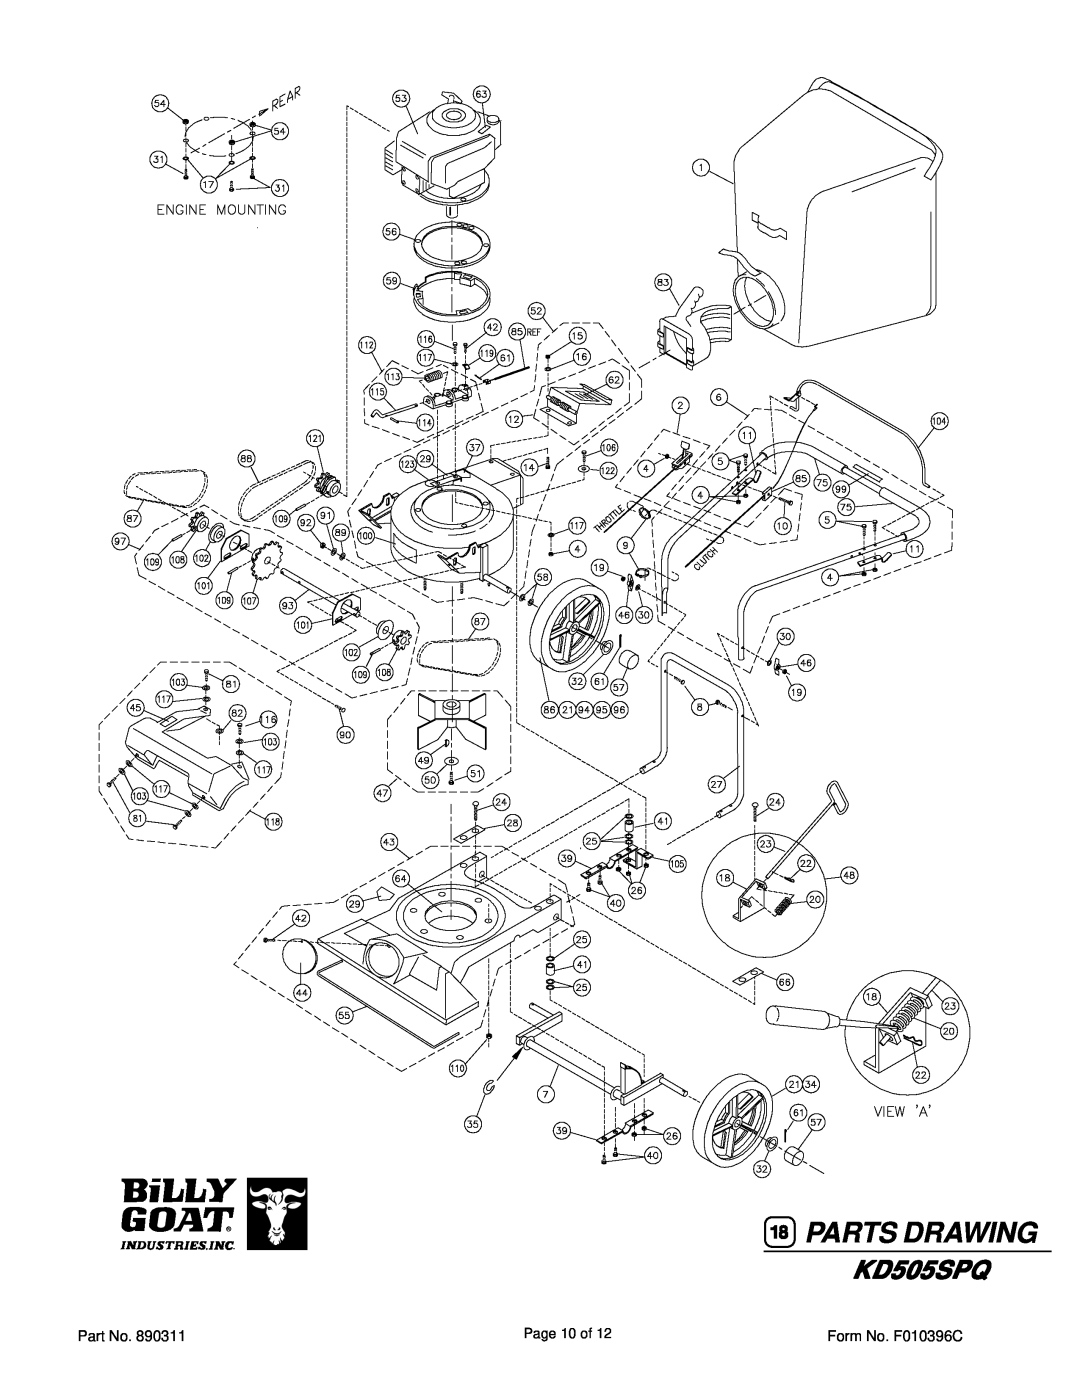 Billy Goat KD505SPQ specifications Parts Drawing, Page 10 of, Form No. F010396C 